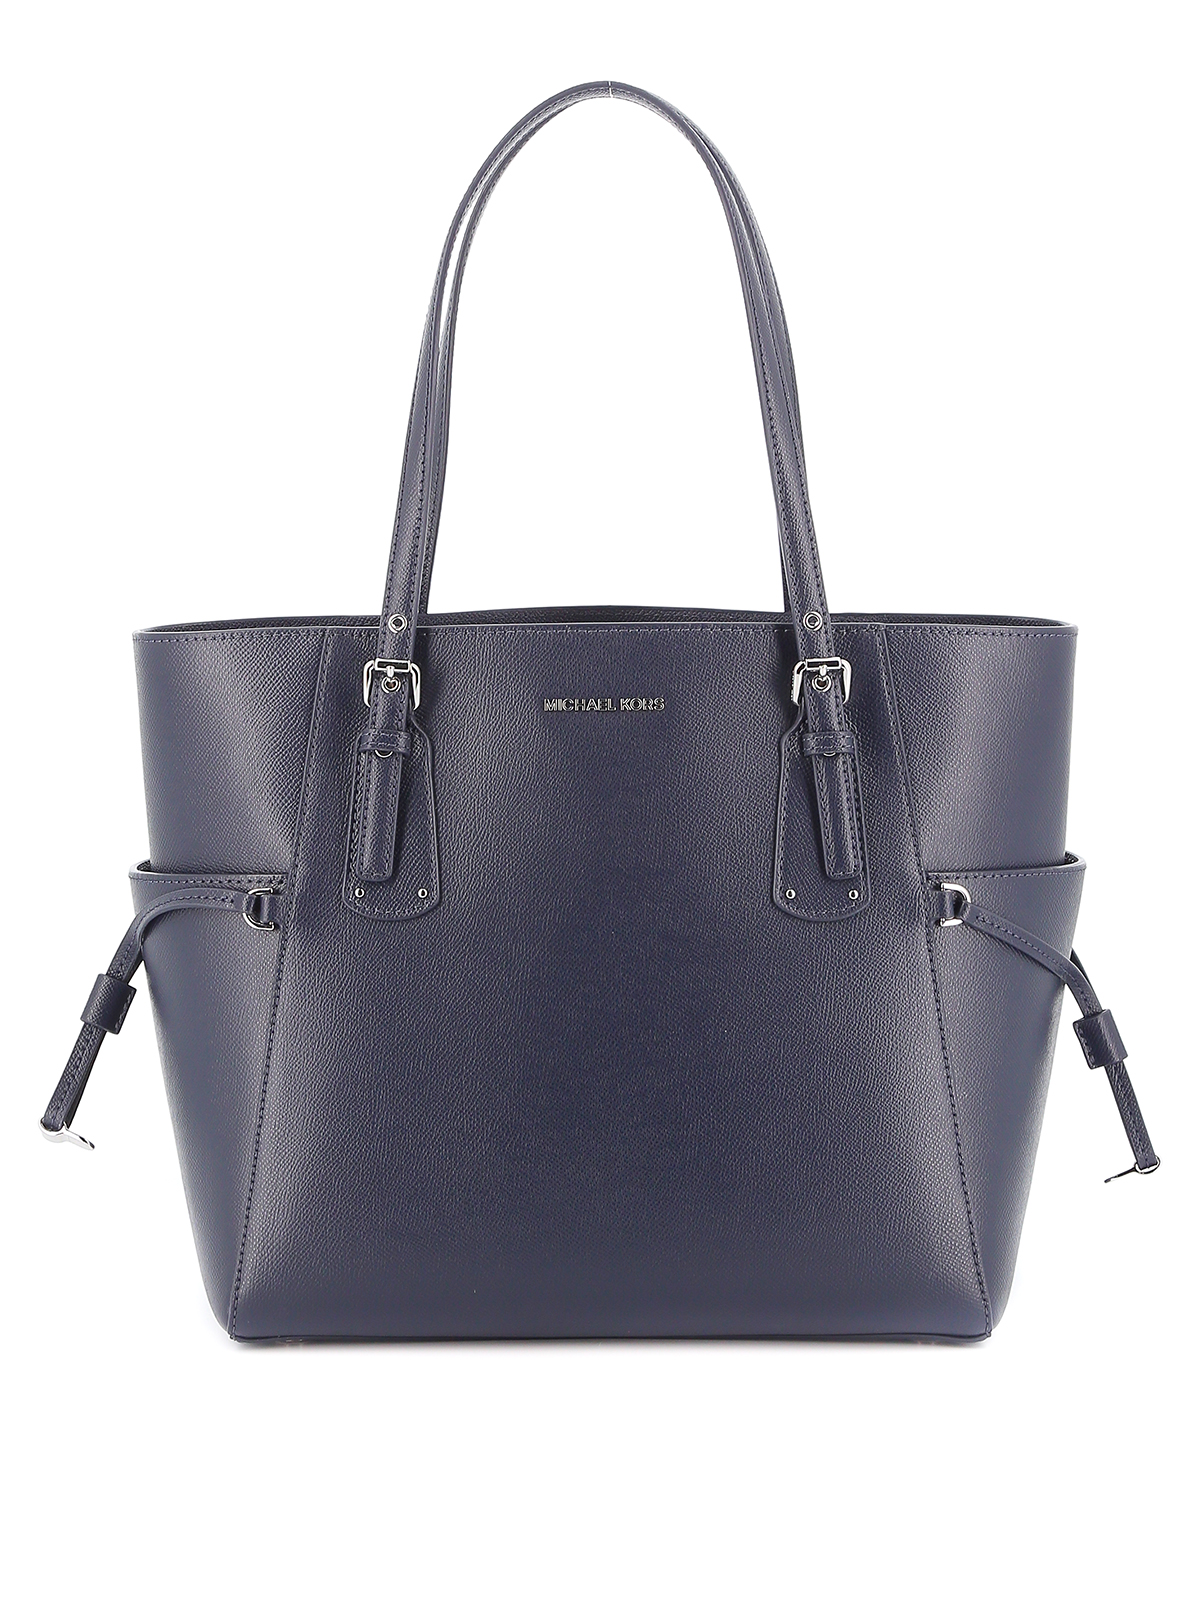 MICHAEL KORS VOYAGER LEATHER TOTE